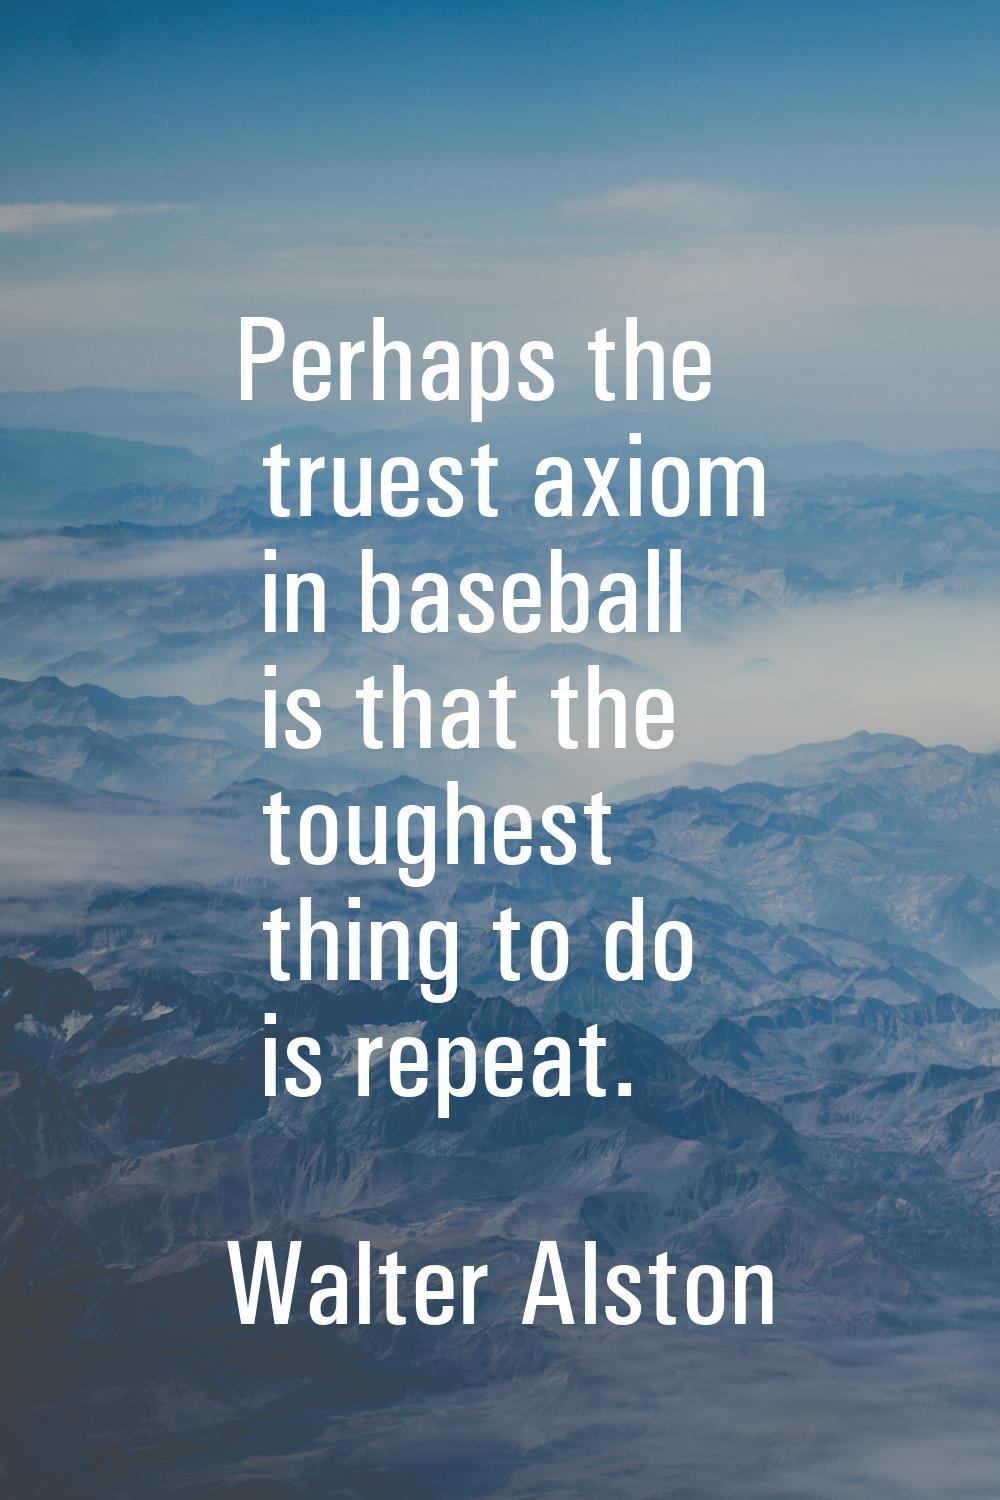 Perhaps the truest axiom in baseball is that the toughest thing to do is repeat.